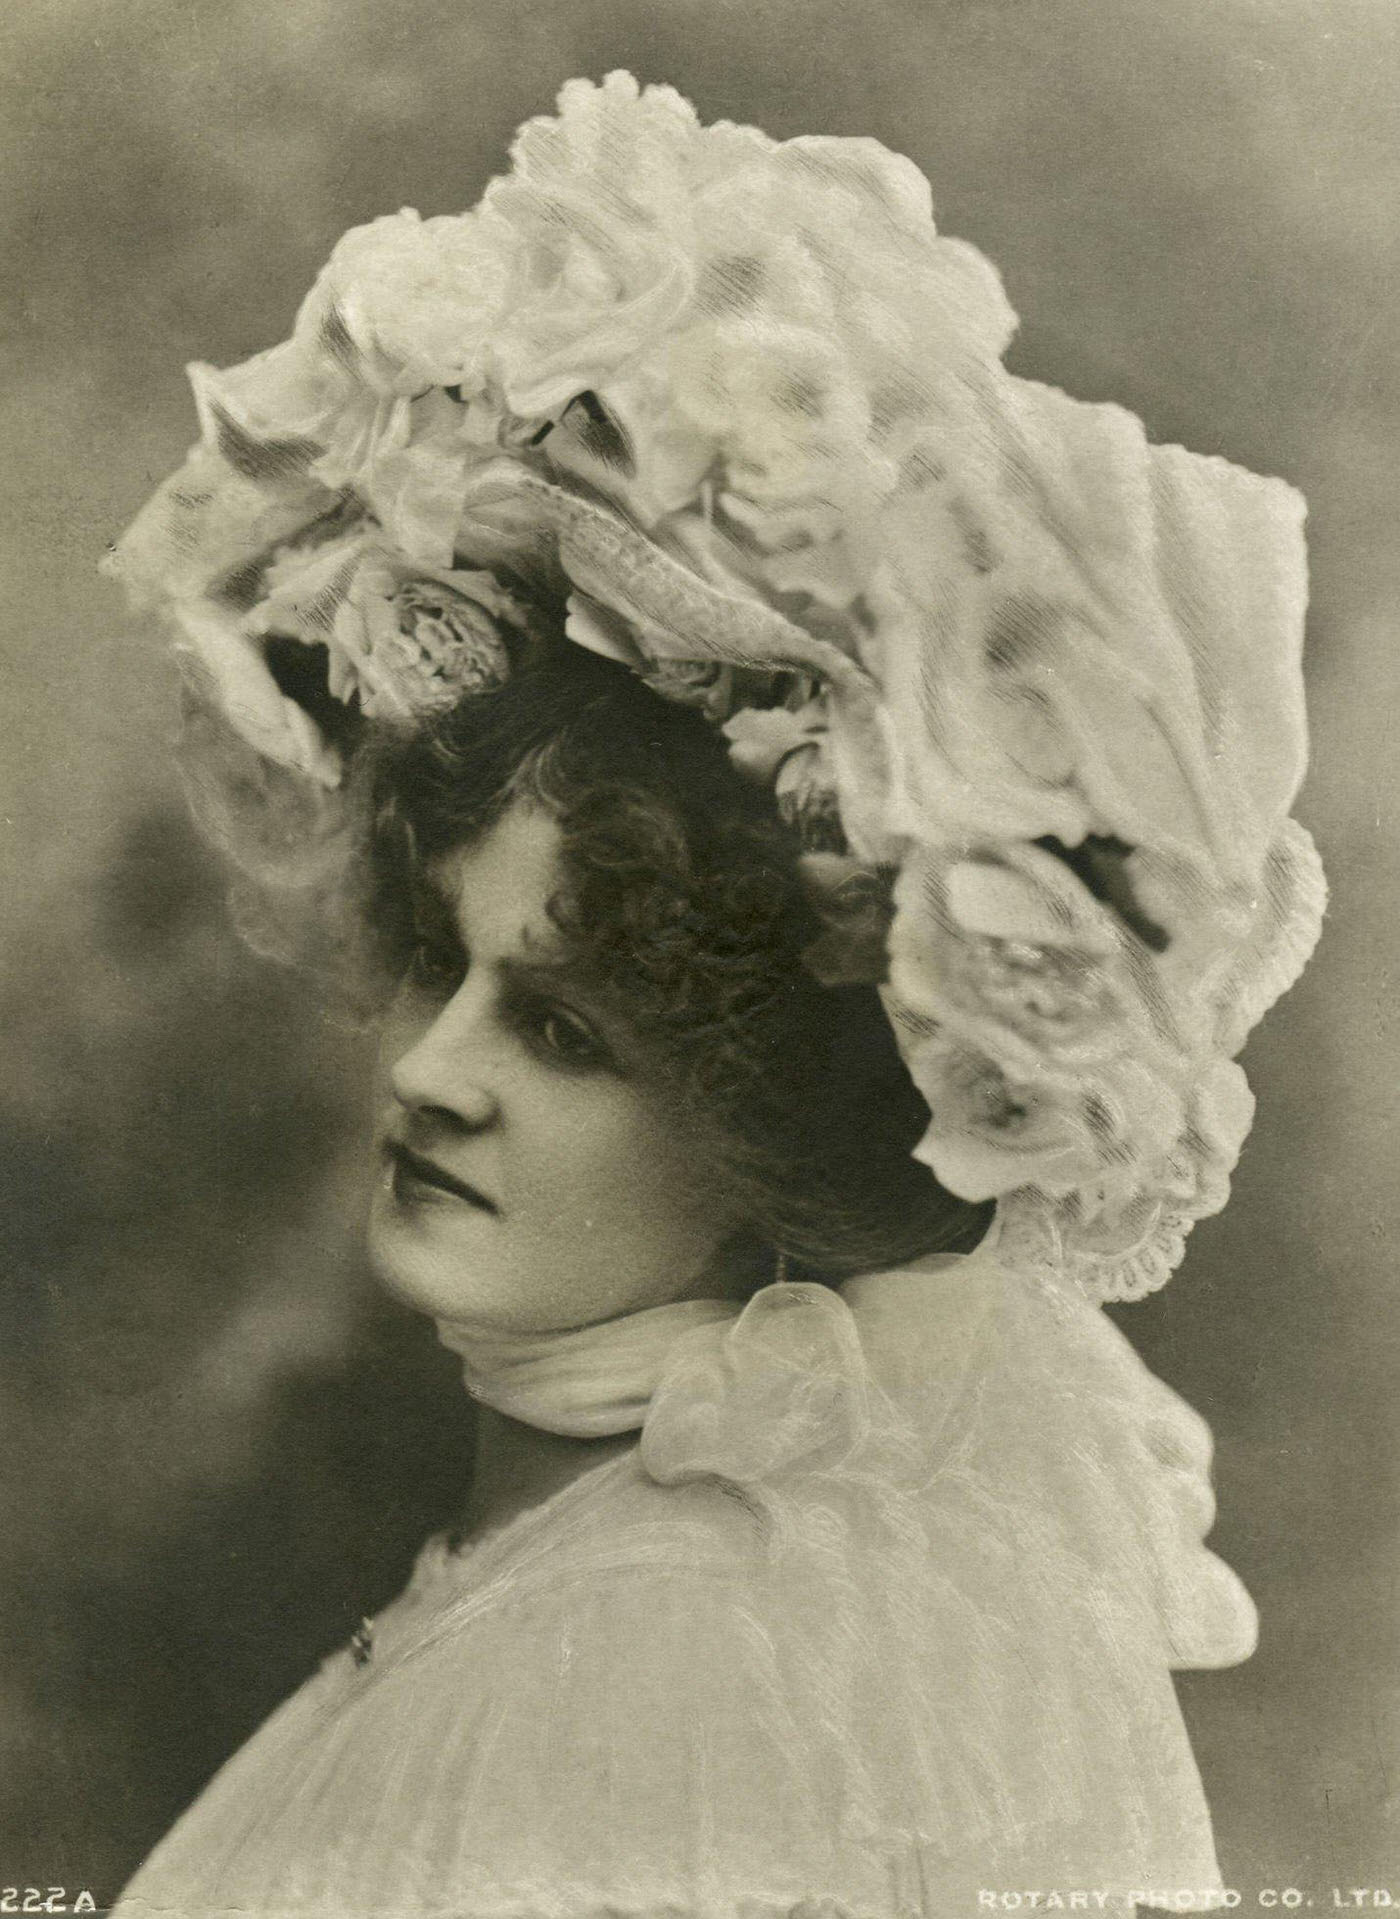 Marie Studholme poses for a portrait in the early 1900s